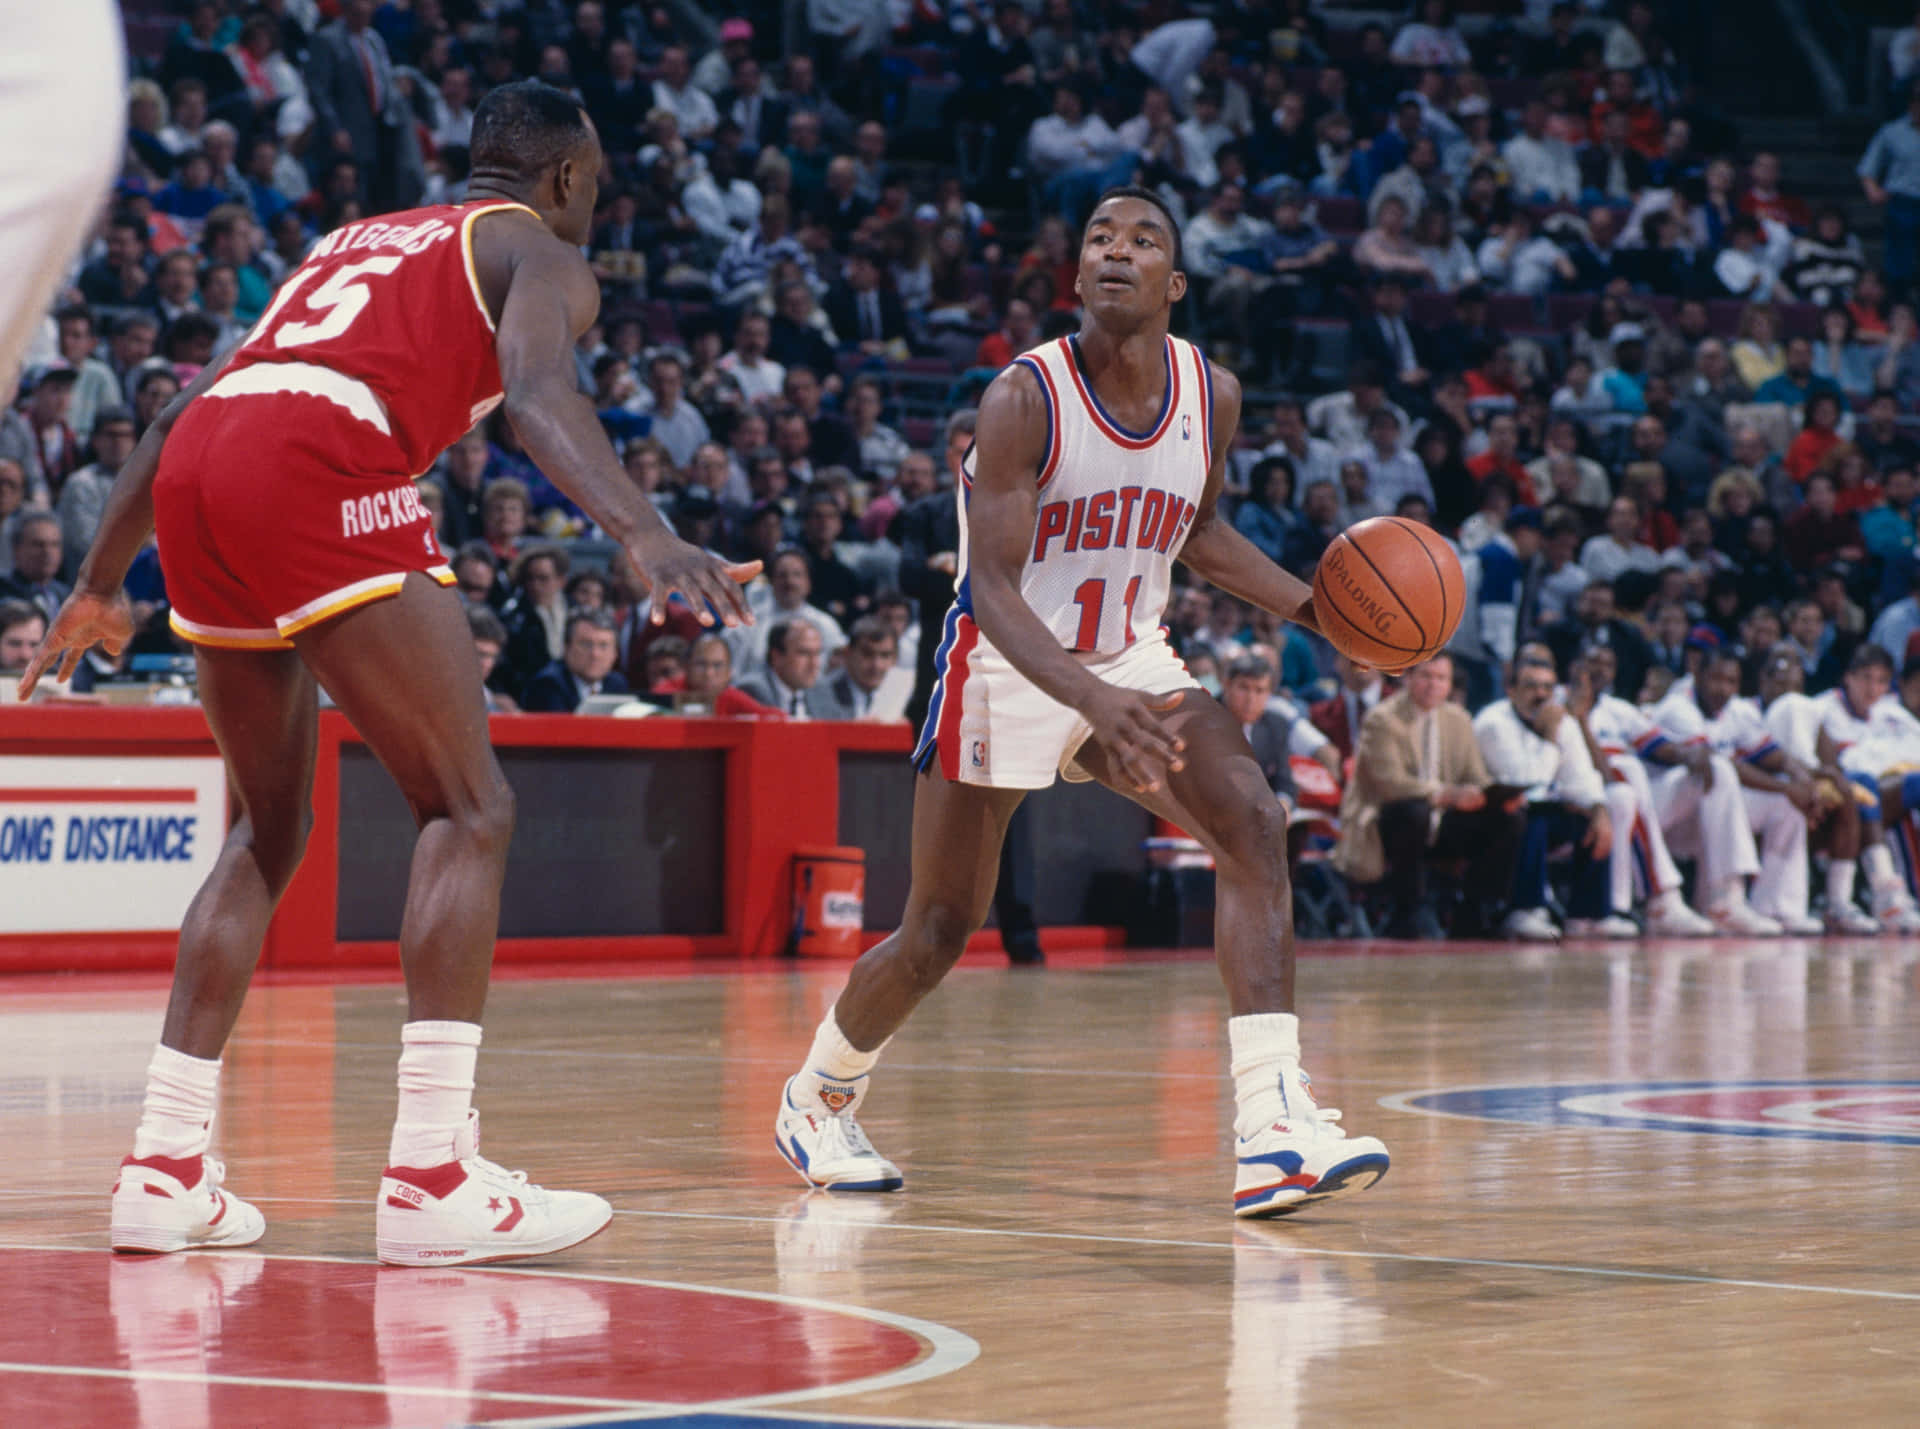 Isiahthomas, Detroit Pistons Och Houston Rockets, 1990 Nba. (note: In Swedish, There Is No Need To Add 